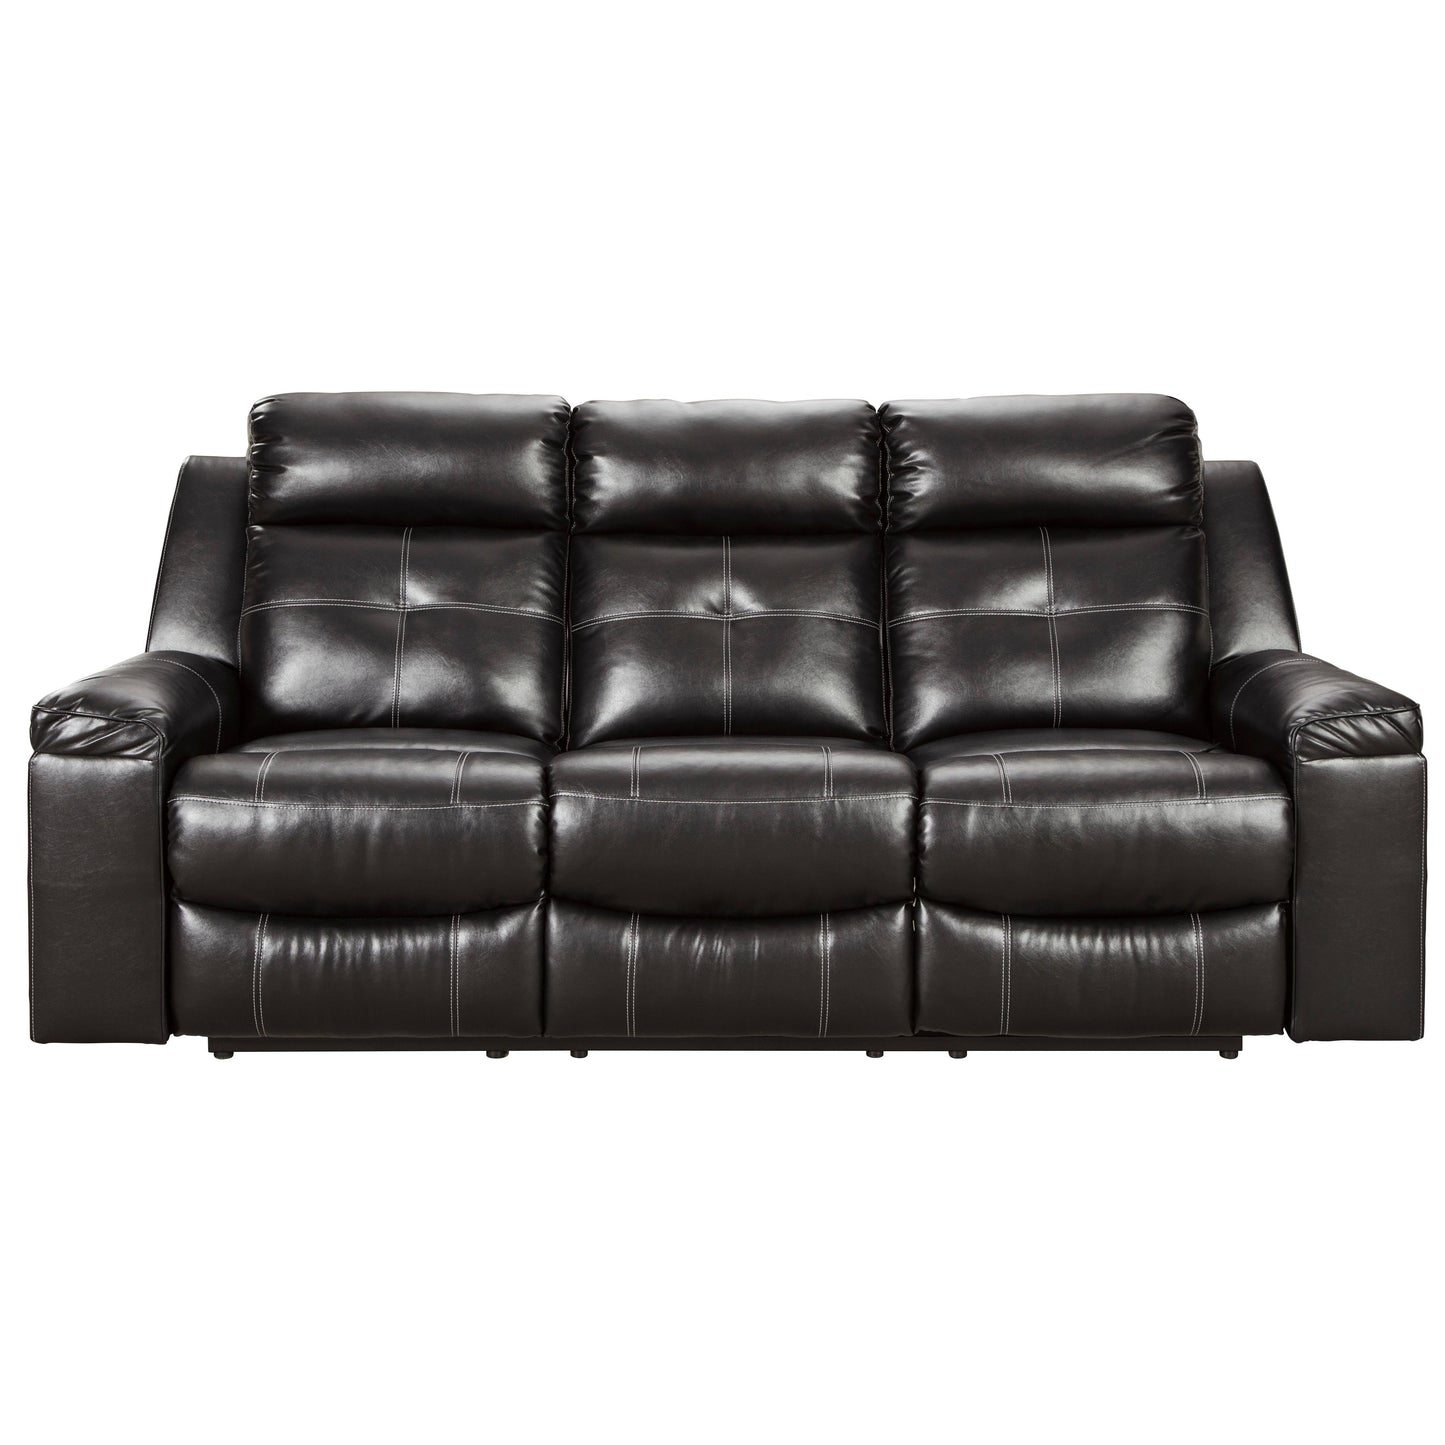 Signature Design by Ashley Kempten Reclining Leather Look Sofa 8210588